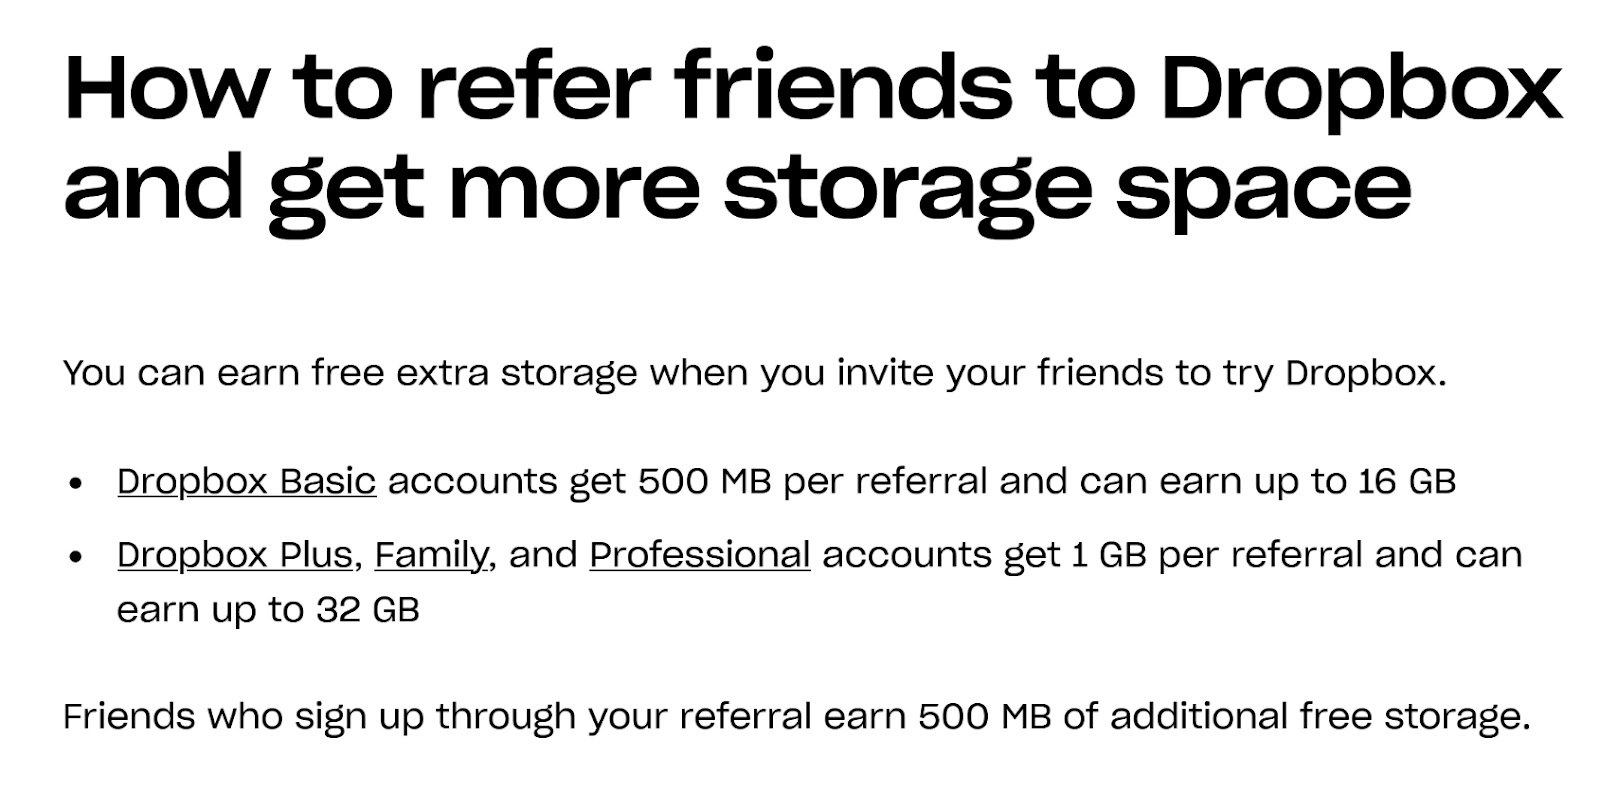 "How to refer friends to Dropbox and get more storage space"